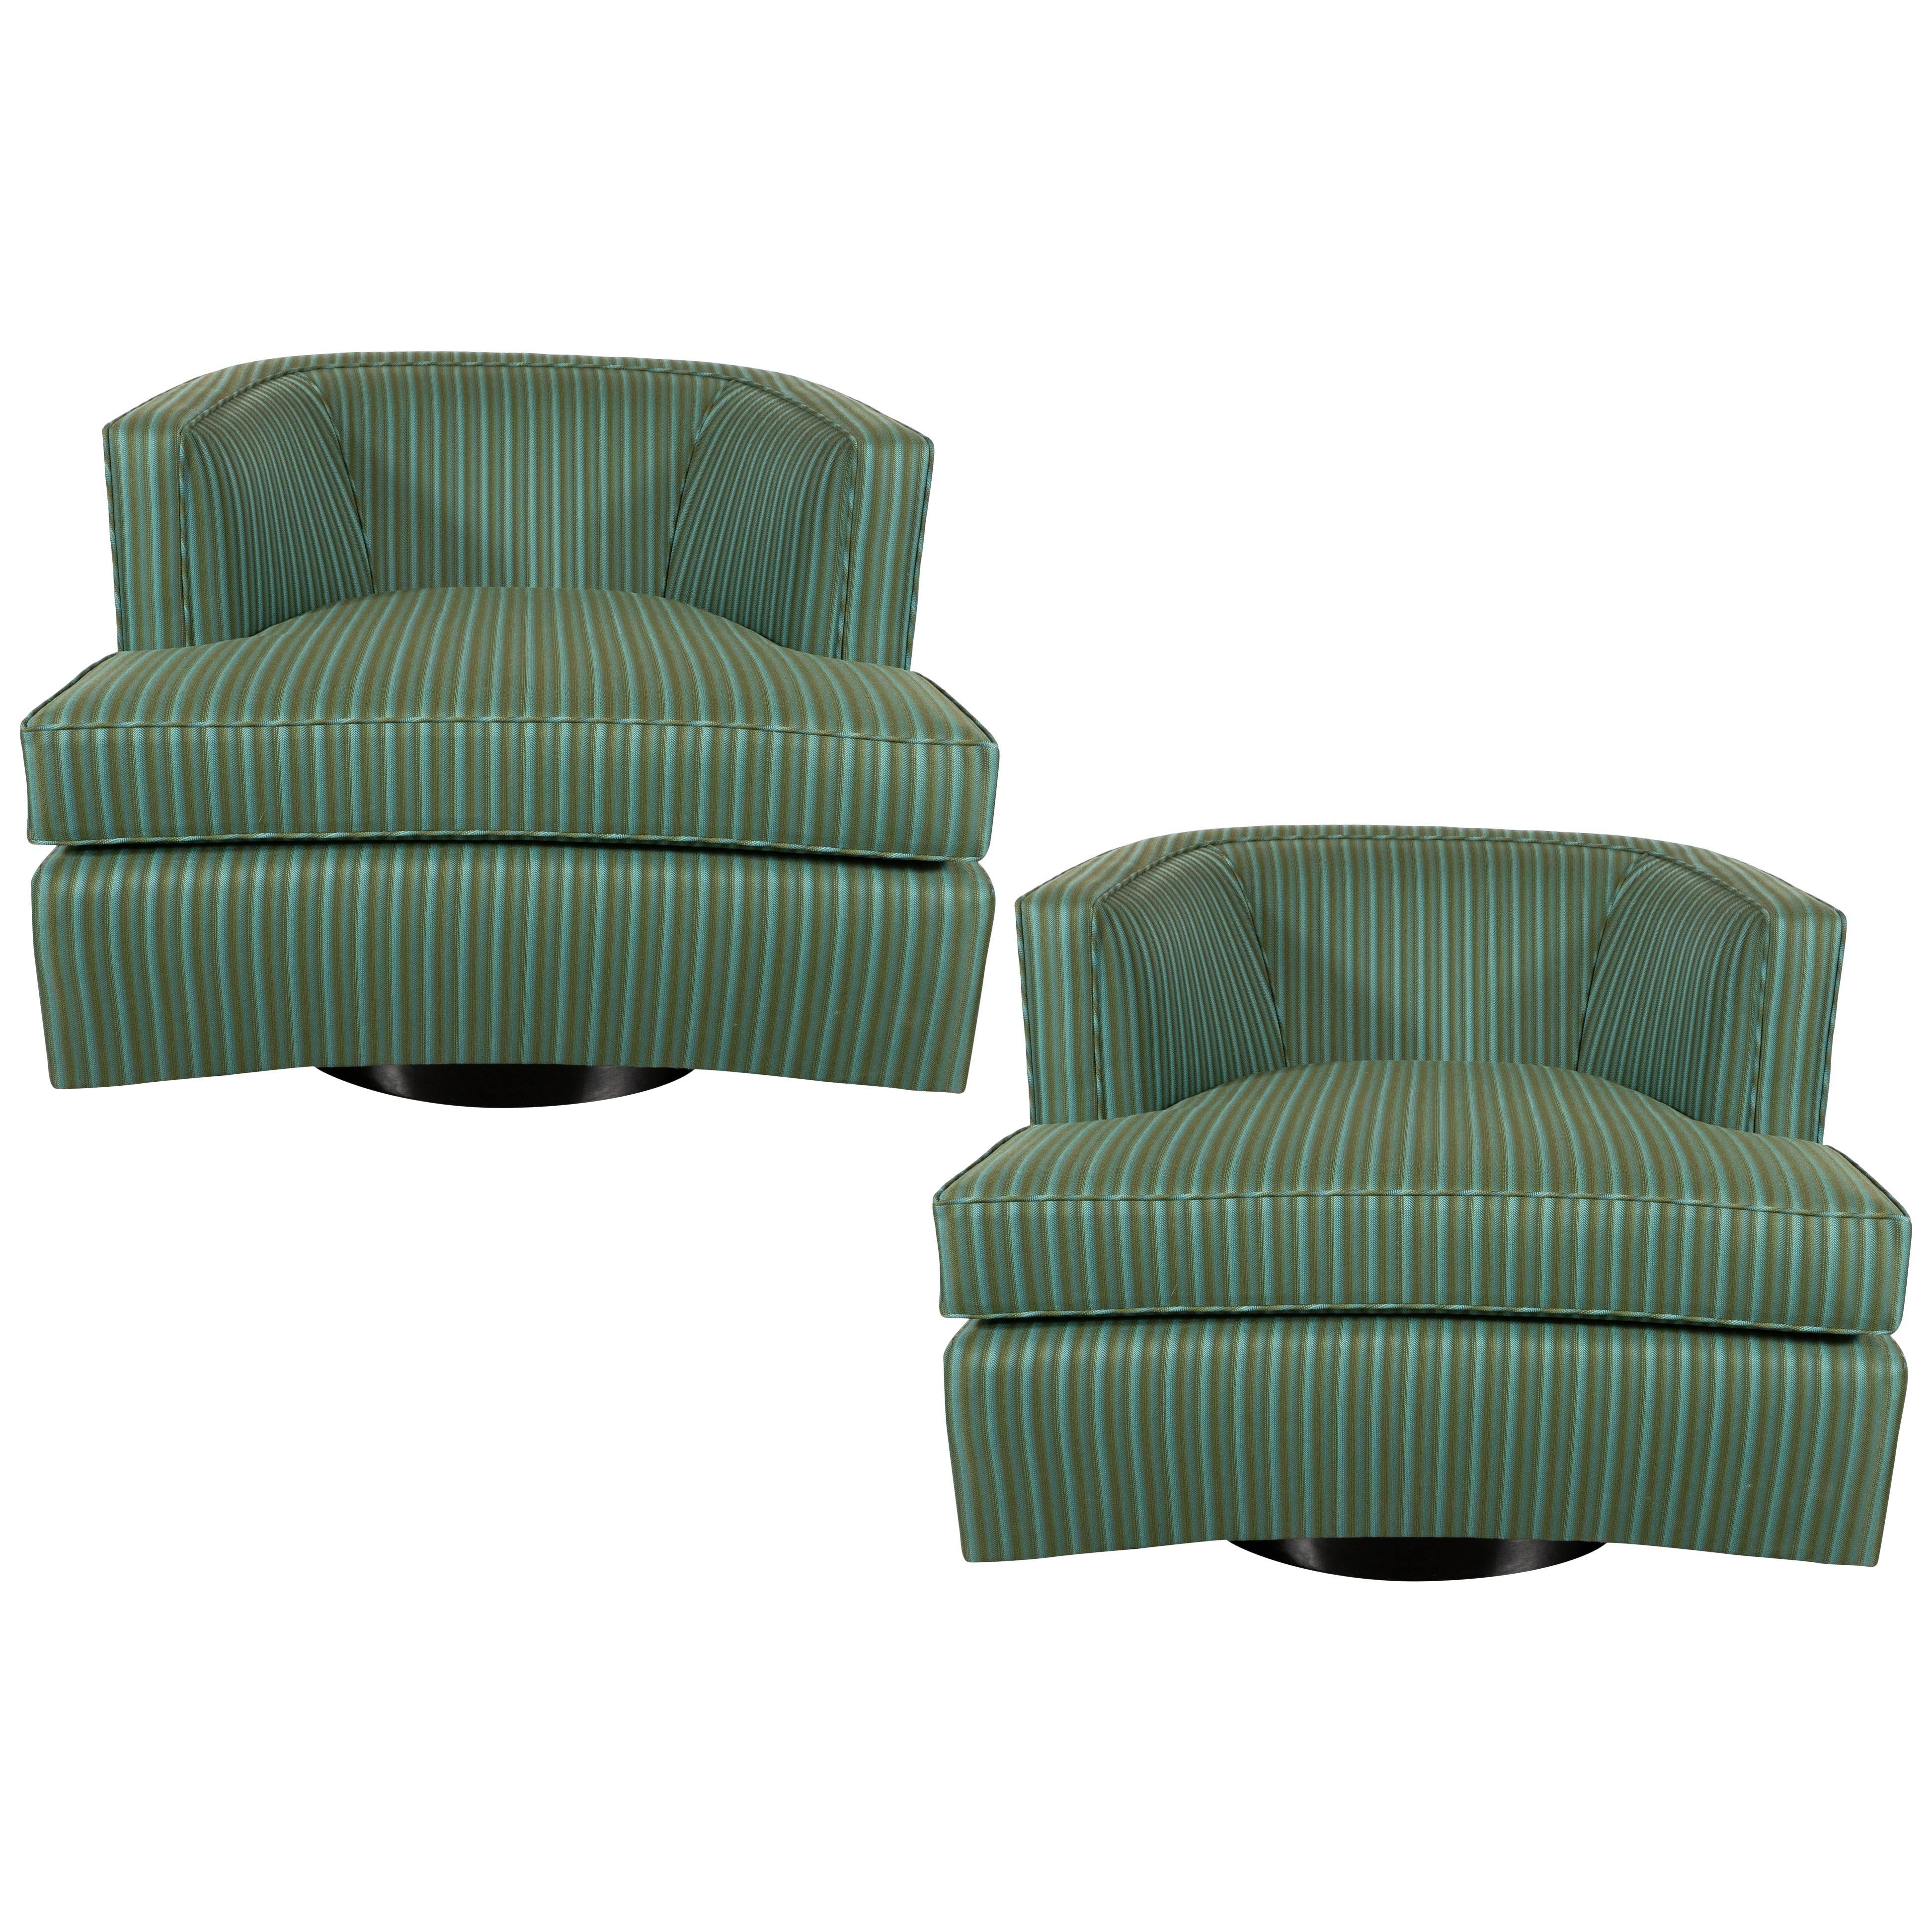 Pair of Mid-Century Modern Swivel Chairs by Harvey Probber